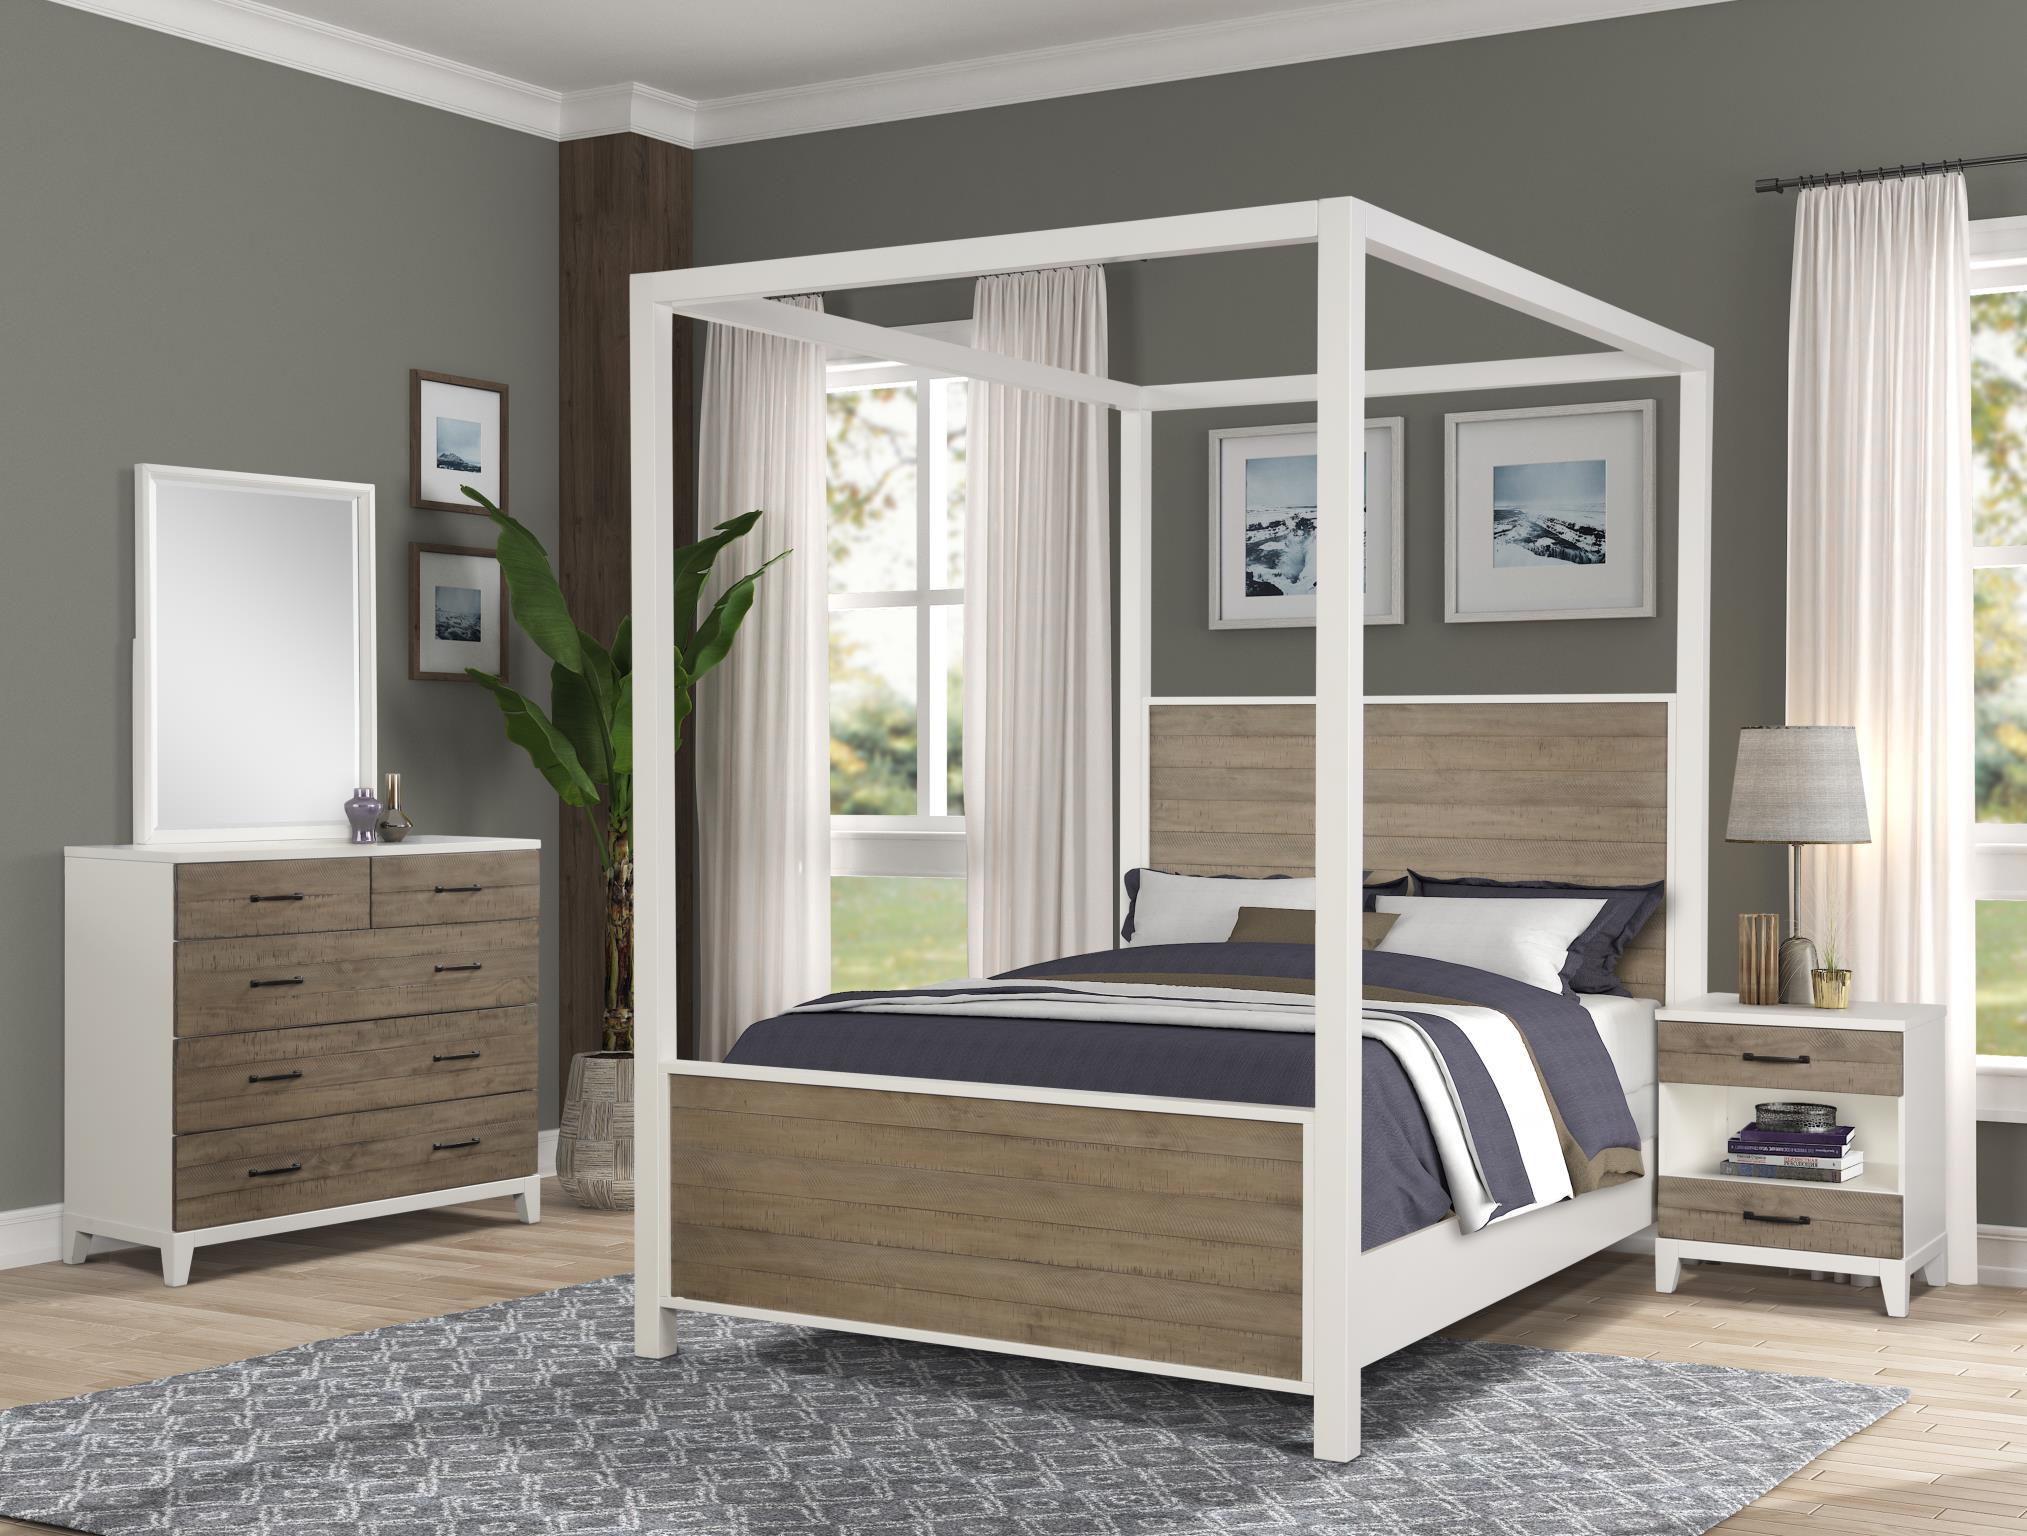 Contemporary, Transitional Bedroom Set Daydreams 1288-113-6pcs in Brown Oak 